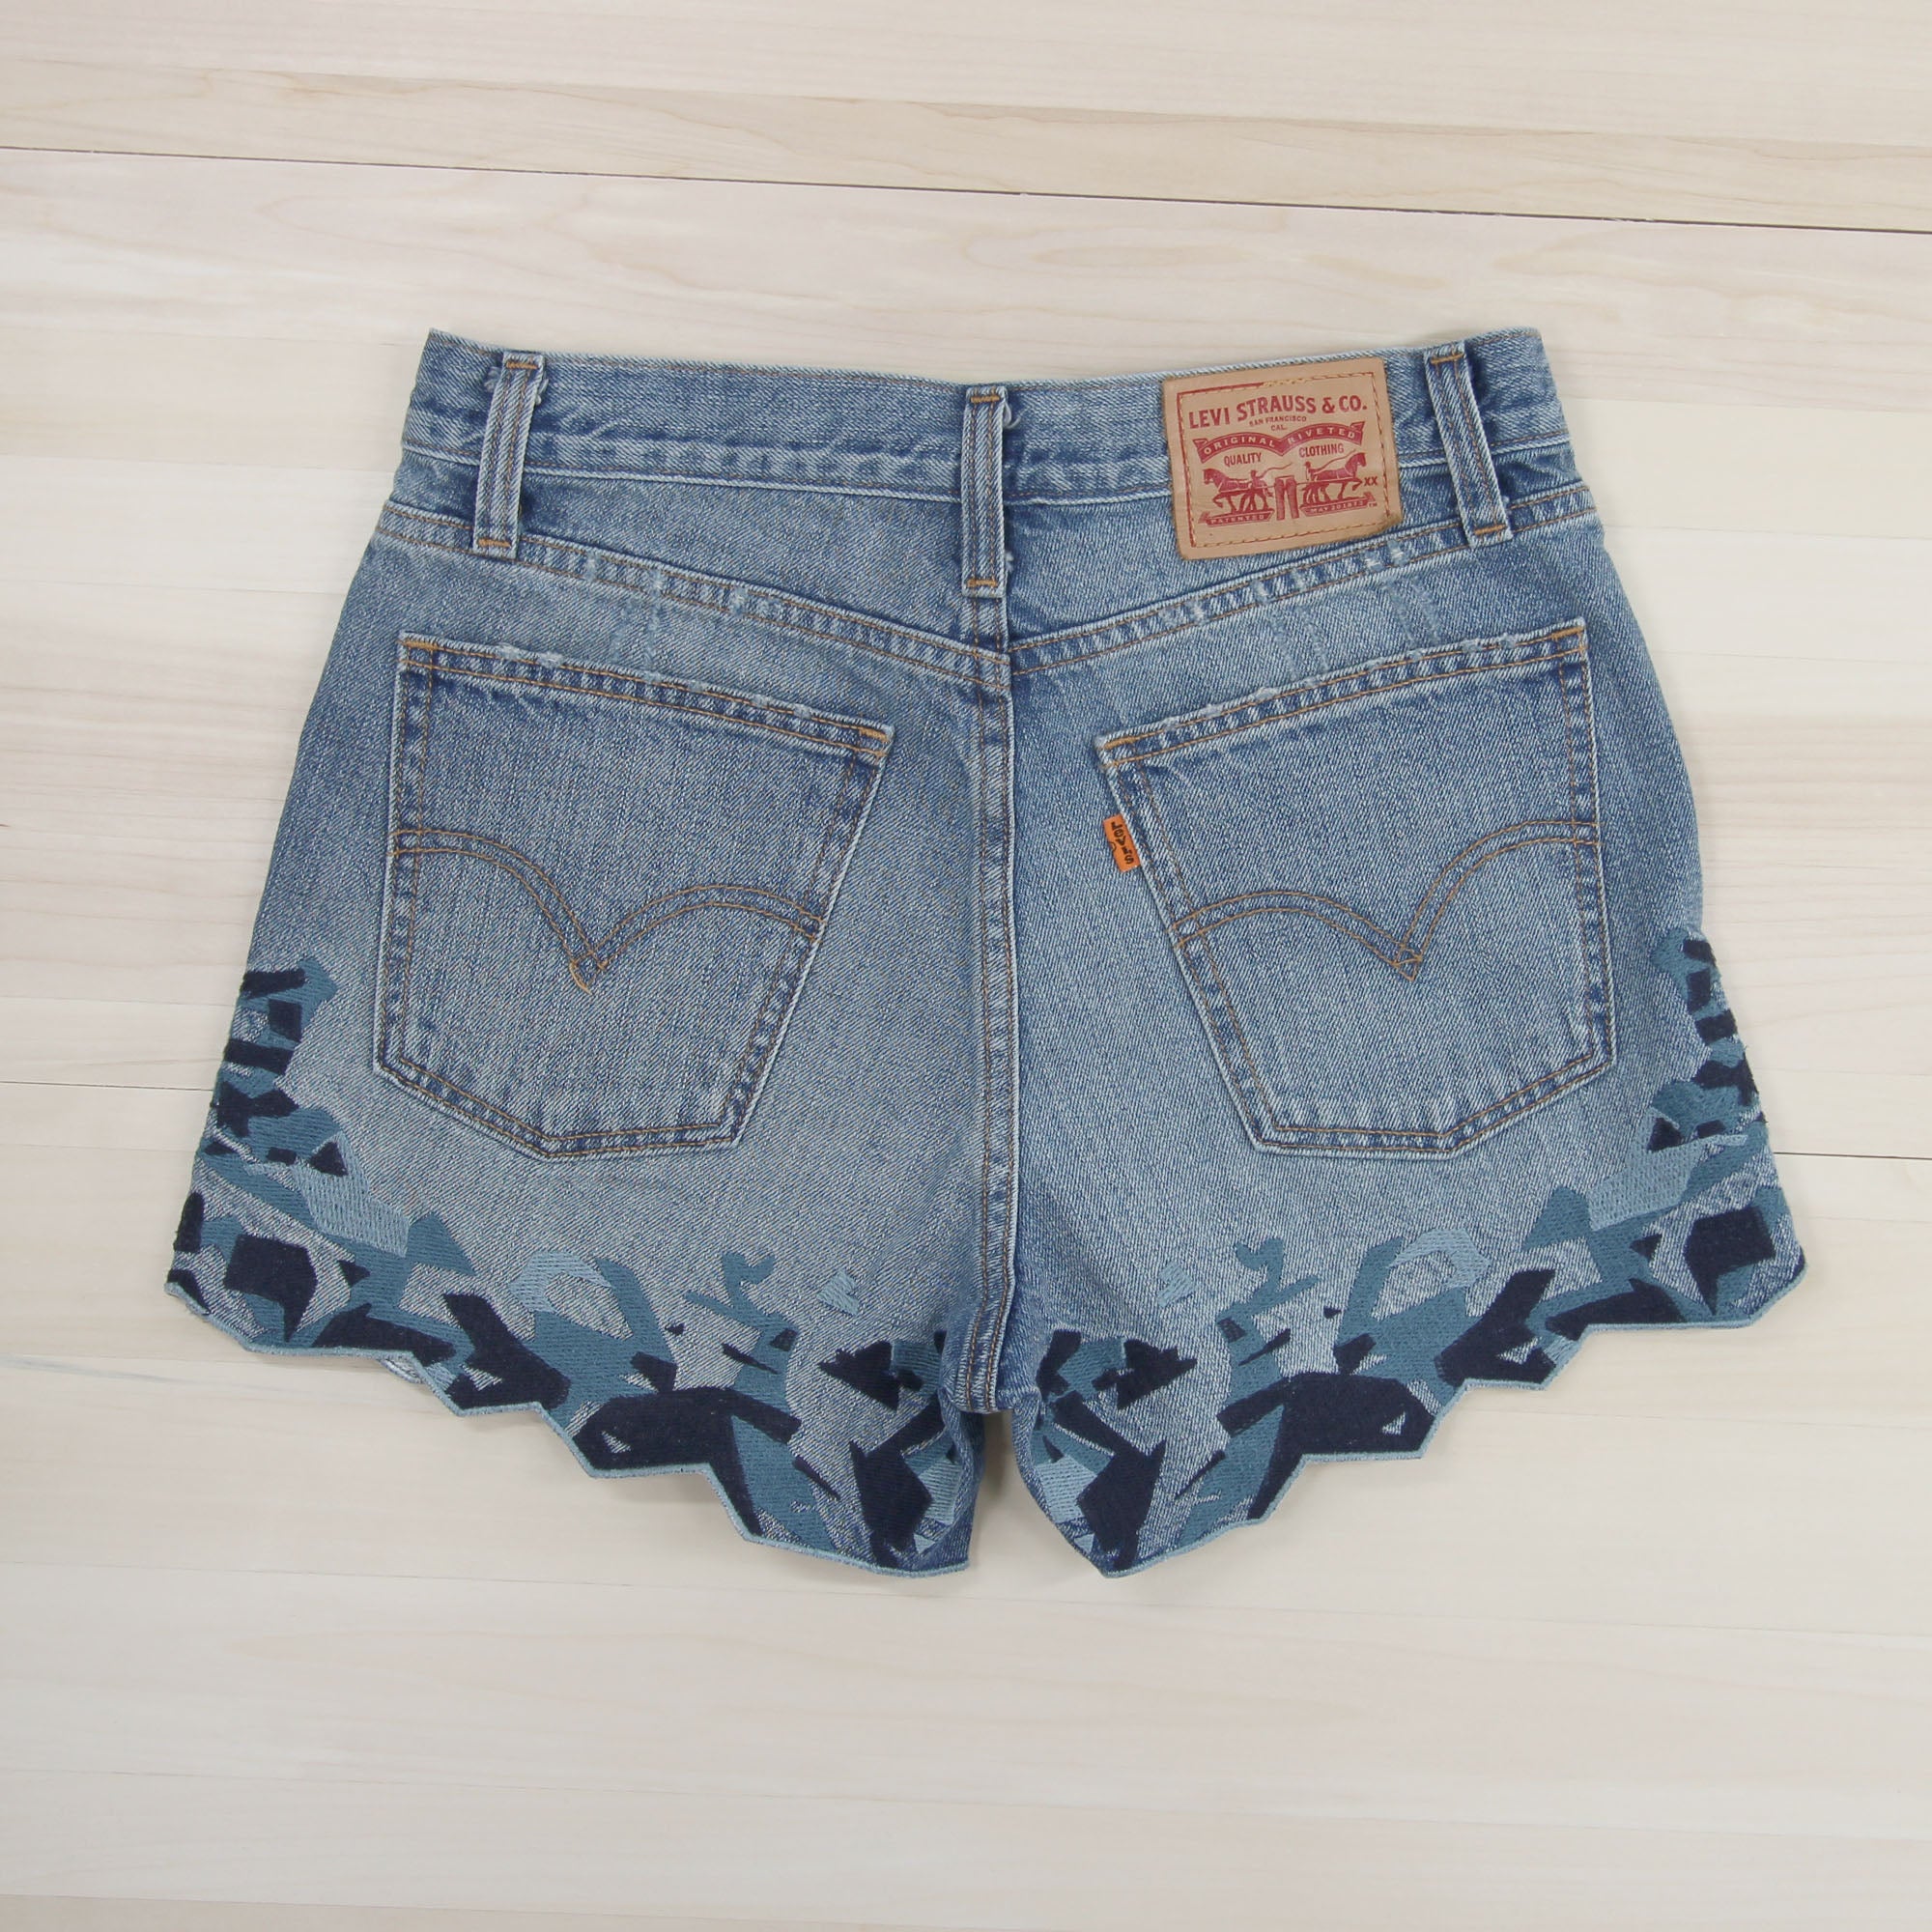 Women's Levi's Embroidered Shorts - 26 Waist Great Lakes Reclaimed Denim